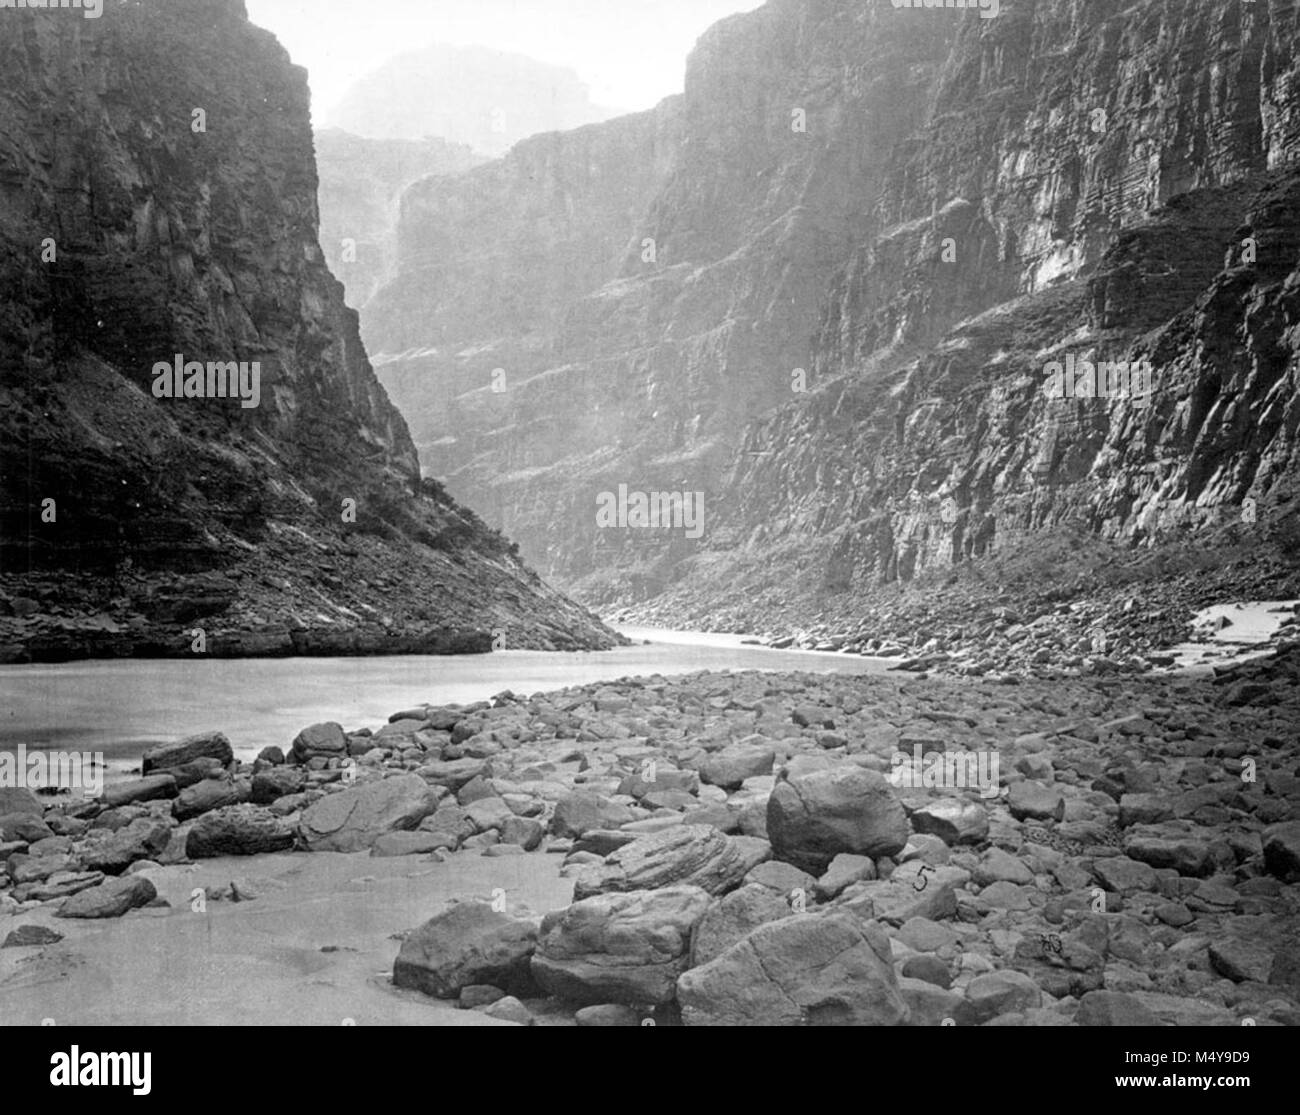 'COLORADO RIVER FROM MOUTH OF KANAB CREEK LOOKING WEST'.  FROM THE 1872 GEORGE M. WHEELER EXPEDITION.  W. BELL PHOTO, 1872.  .  CATALOG # GRCA 13895    Grand Canyon Nat Park Historic River Photo. Stock Photo